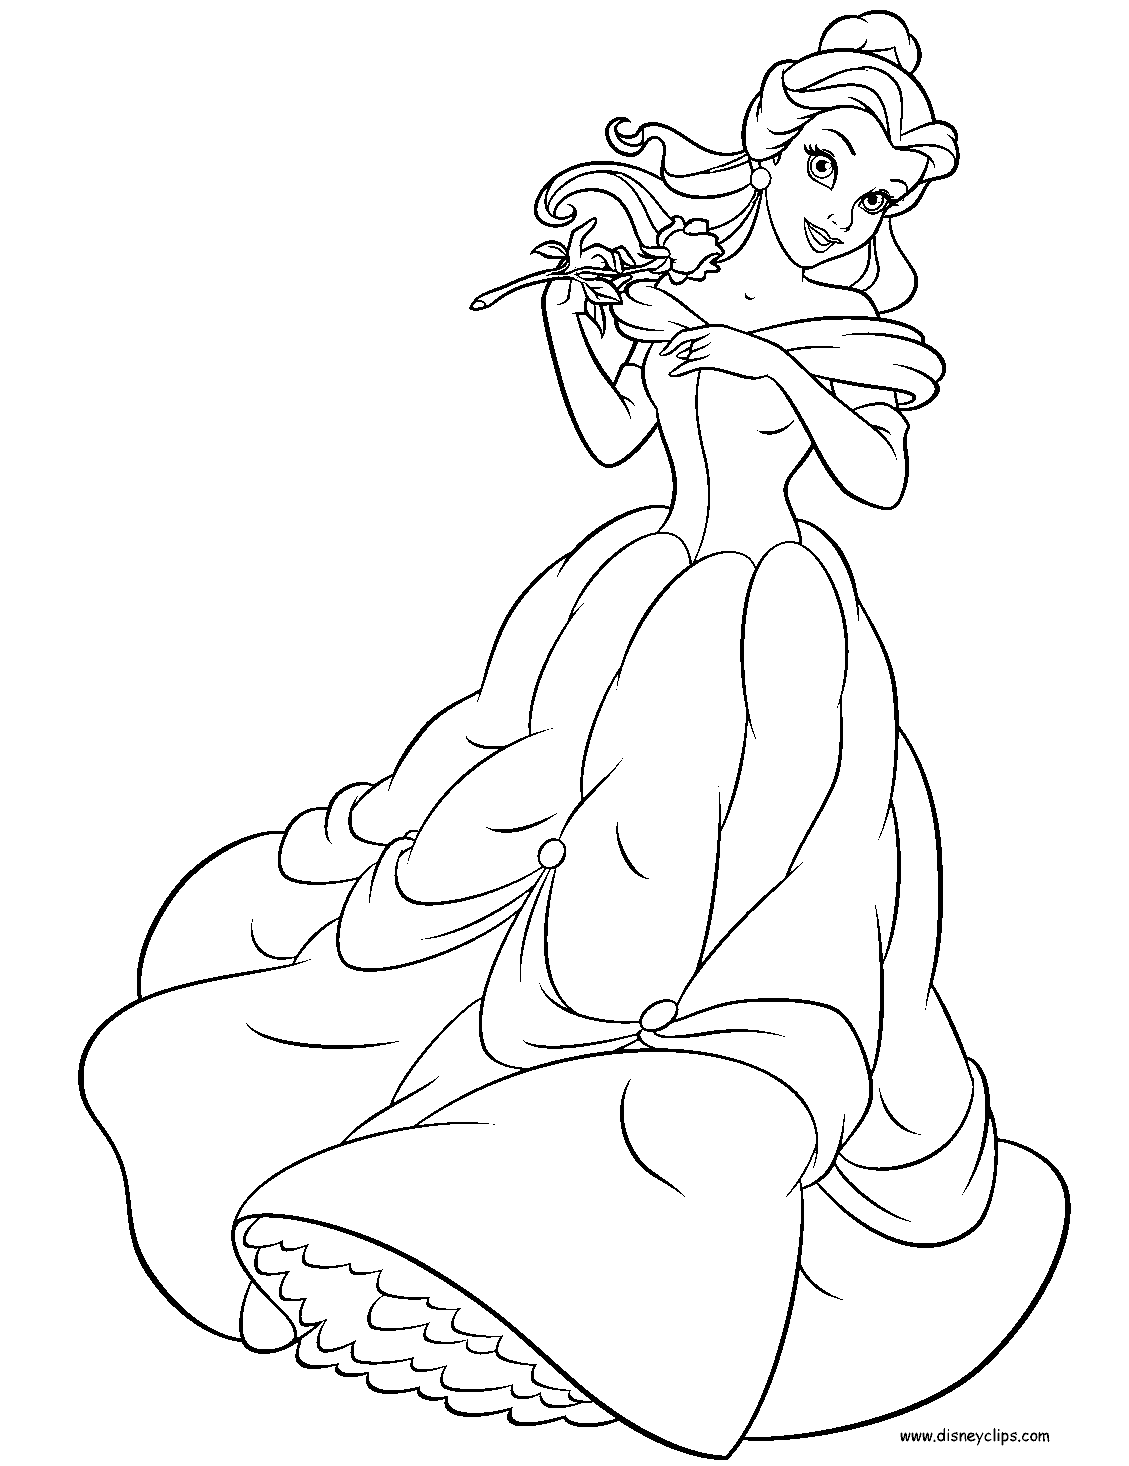 Princess Belle with Rose Coloring Pages